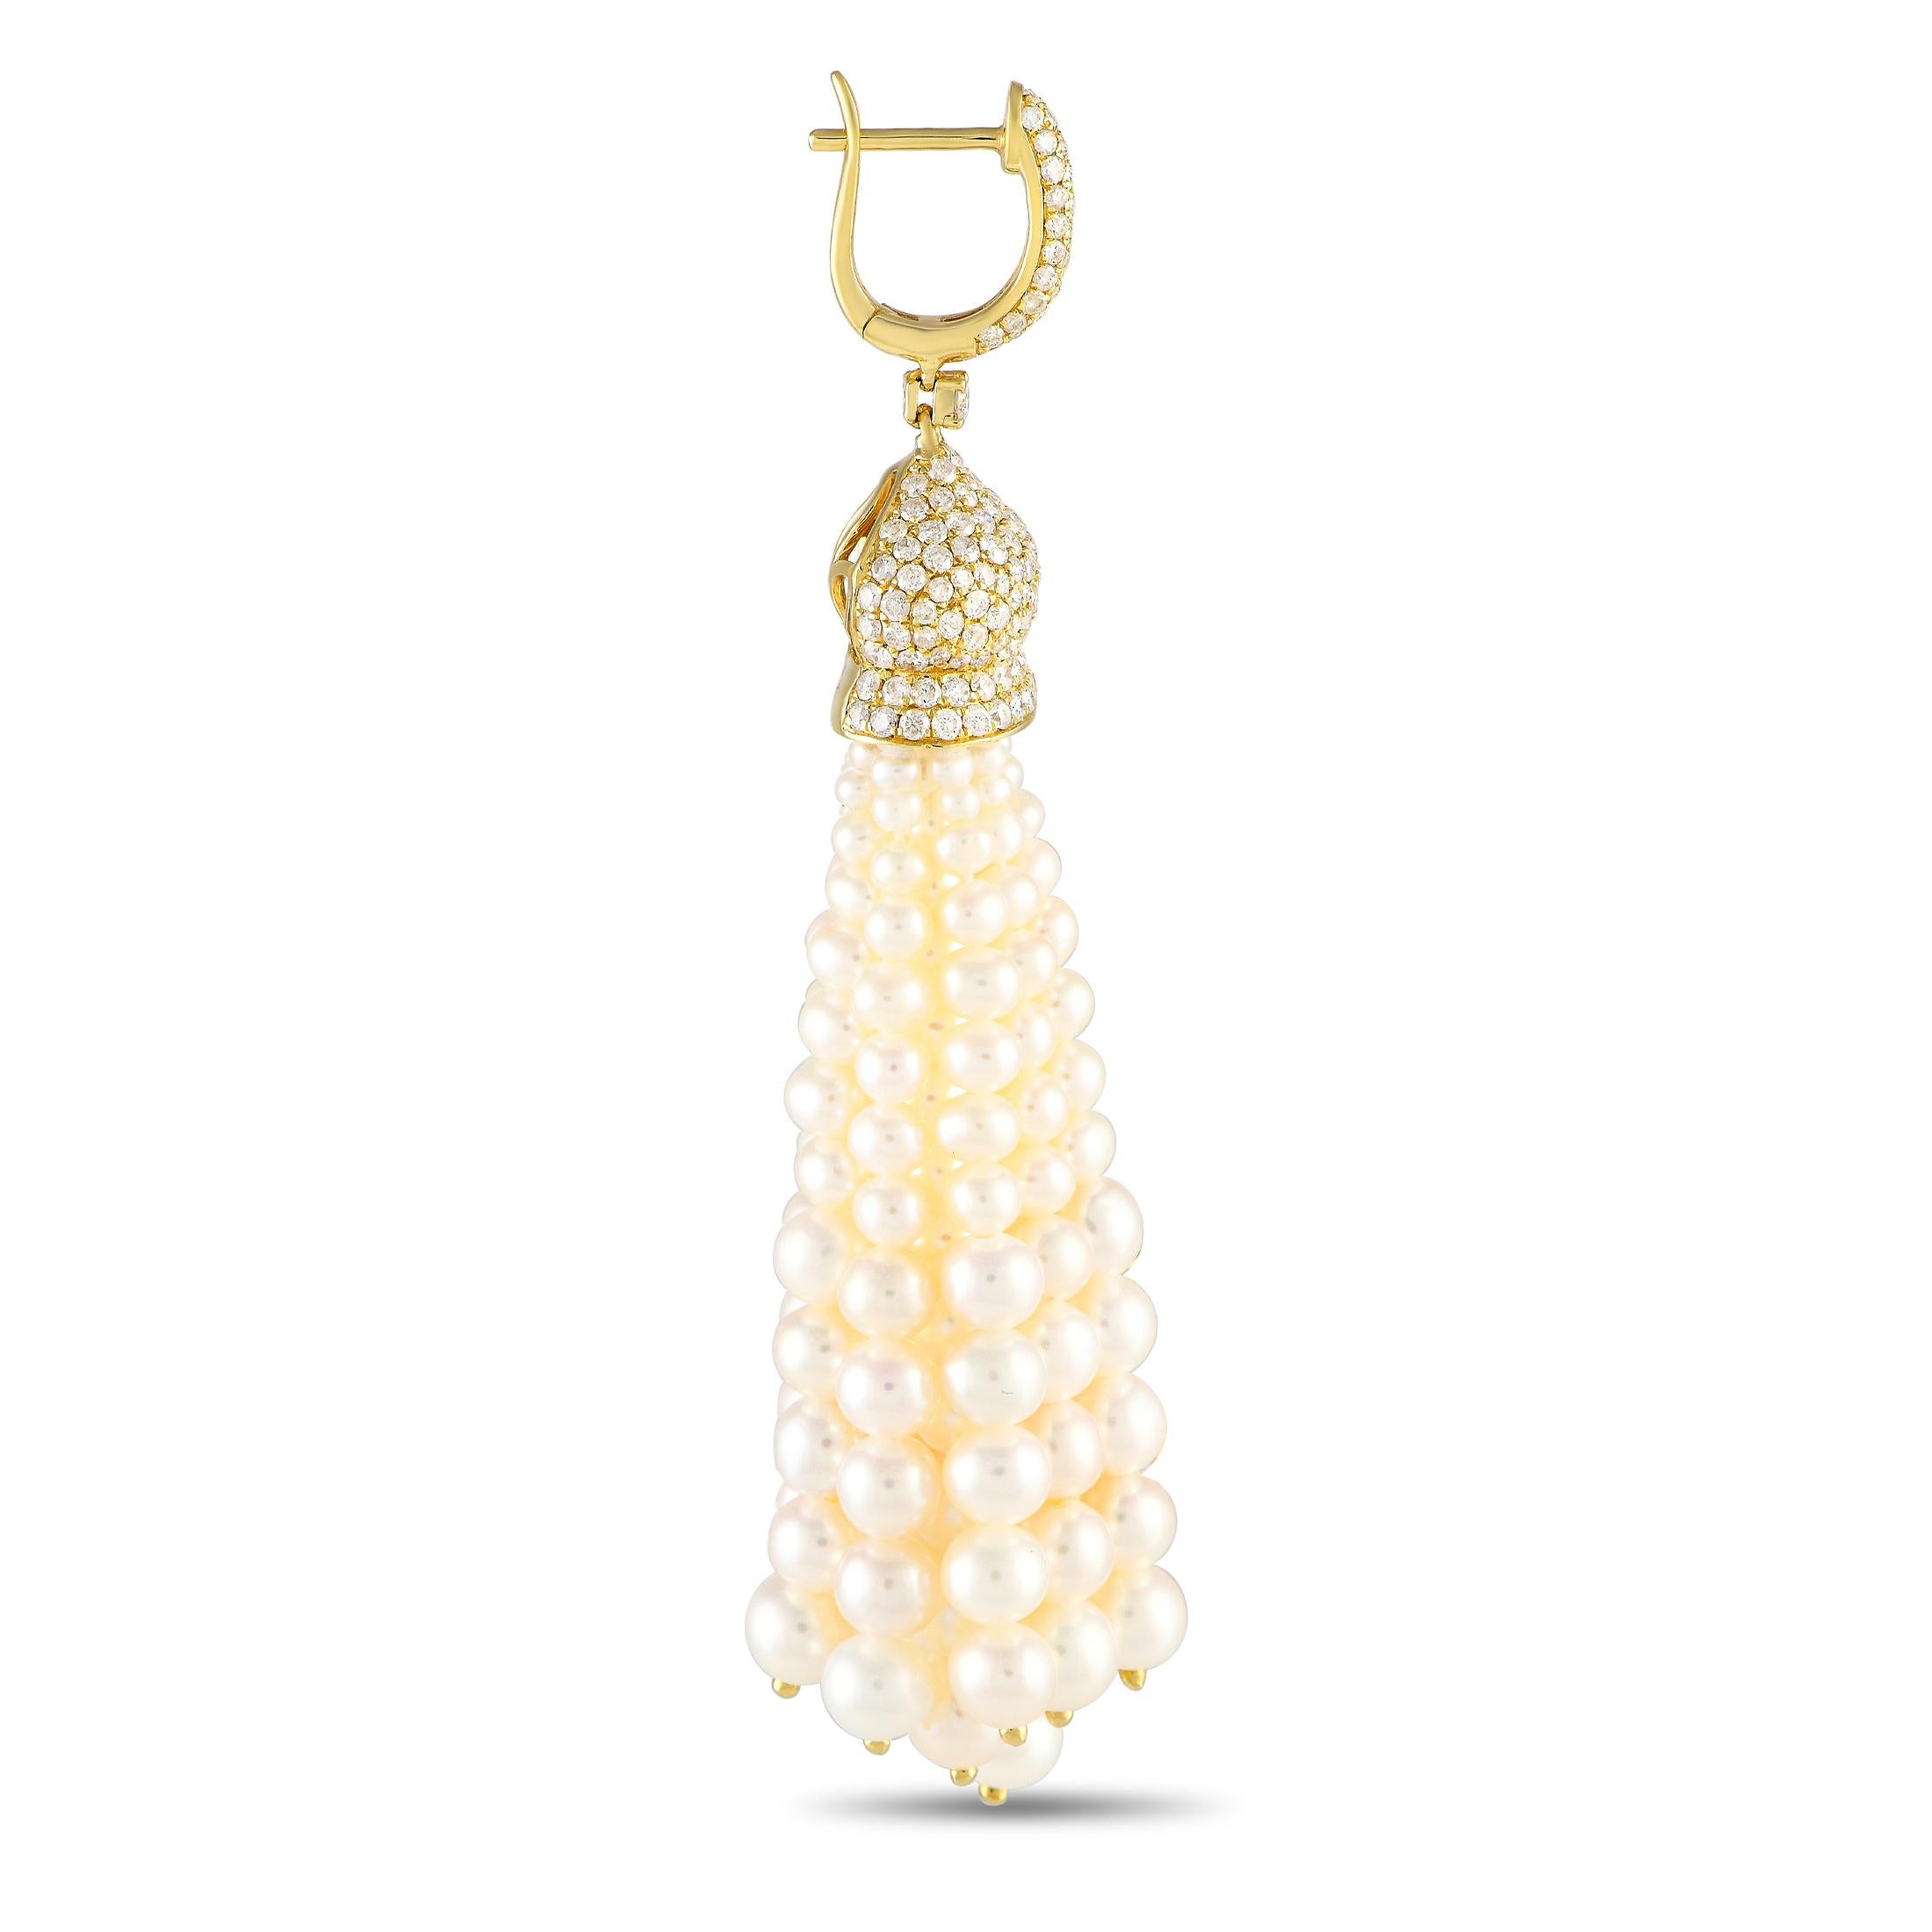 A pair of earrings you'll treasure for always. Beaming with graceful elegance and timeless sophistication, this pair from LB Exclusive has the perfect combination of pearls and diamonds. Each earring features a hinged C-hoop embellished with